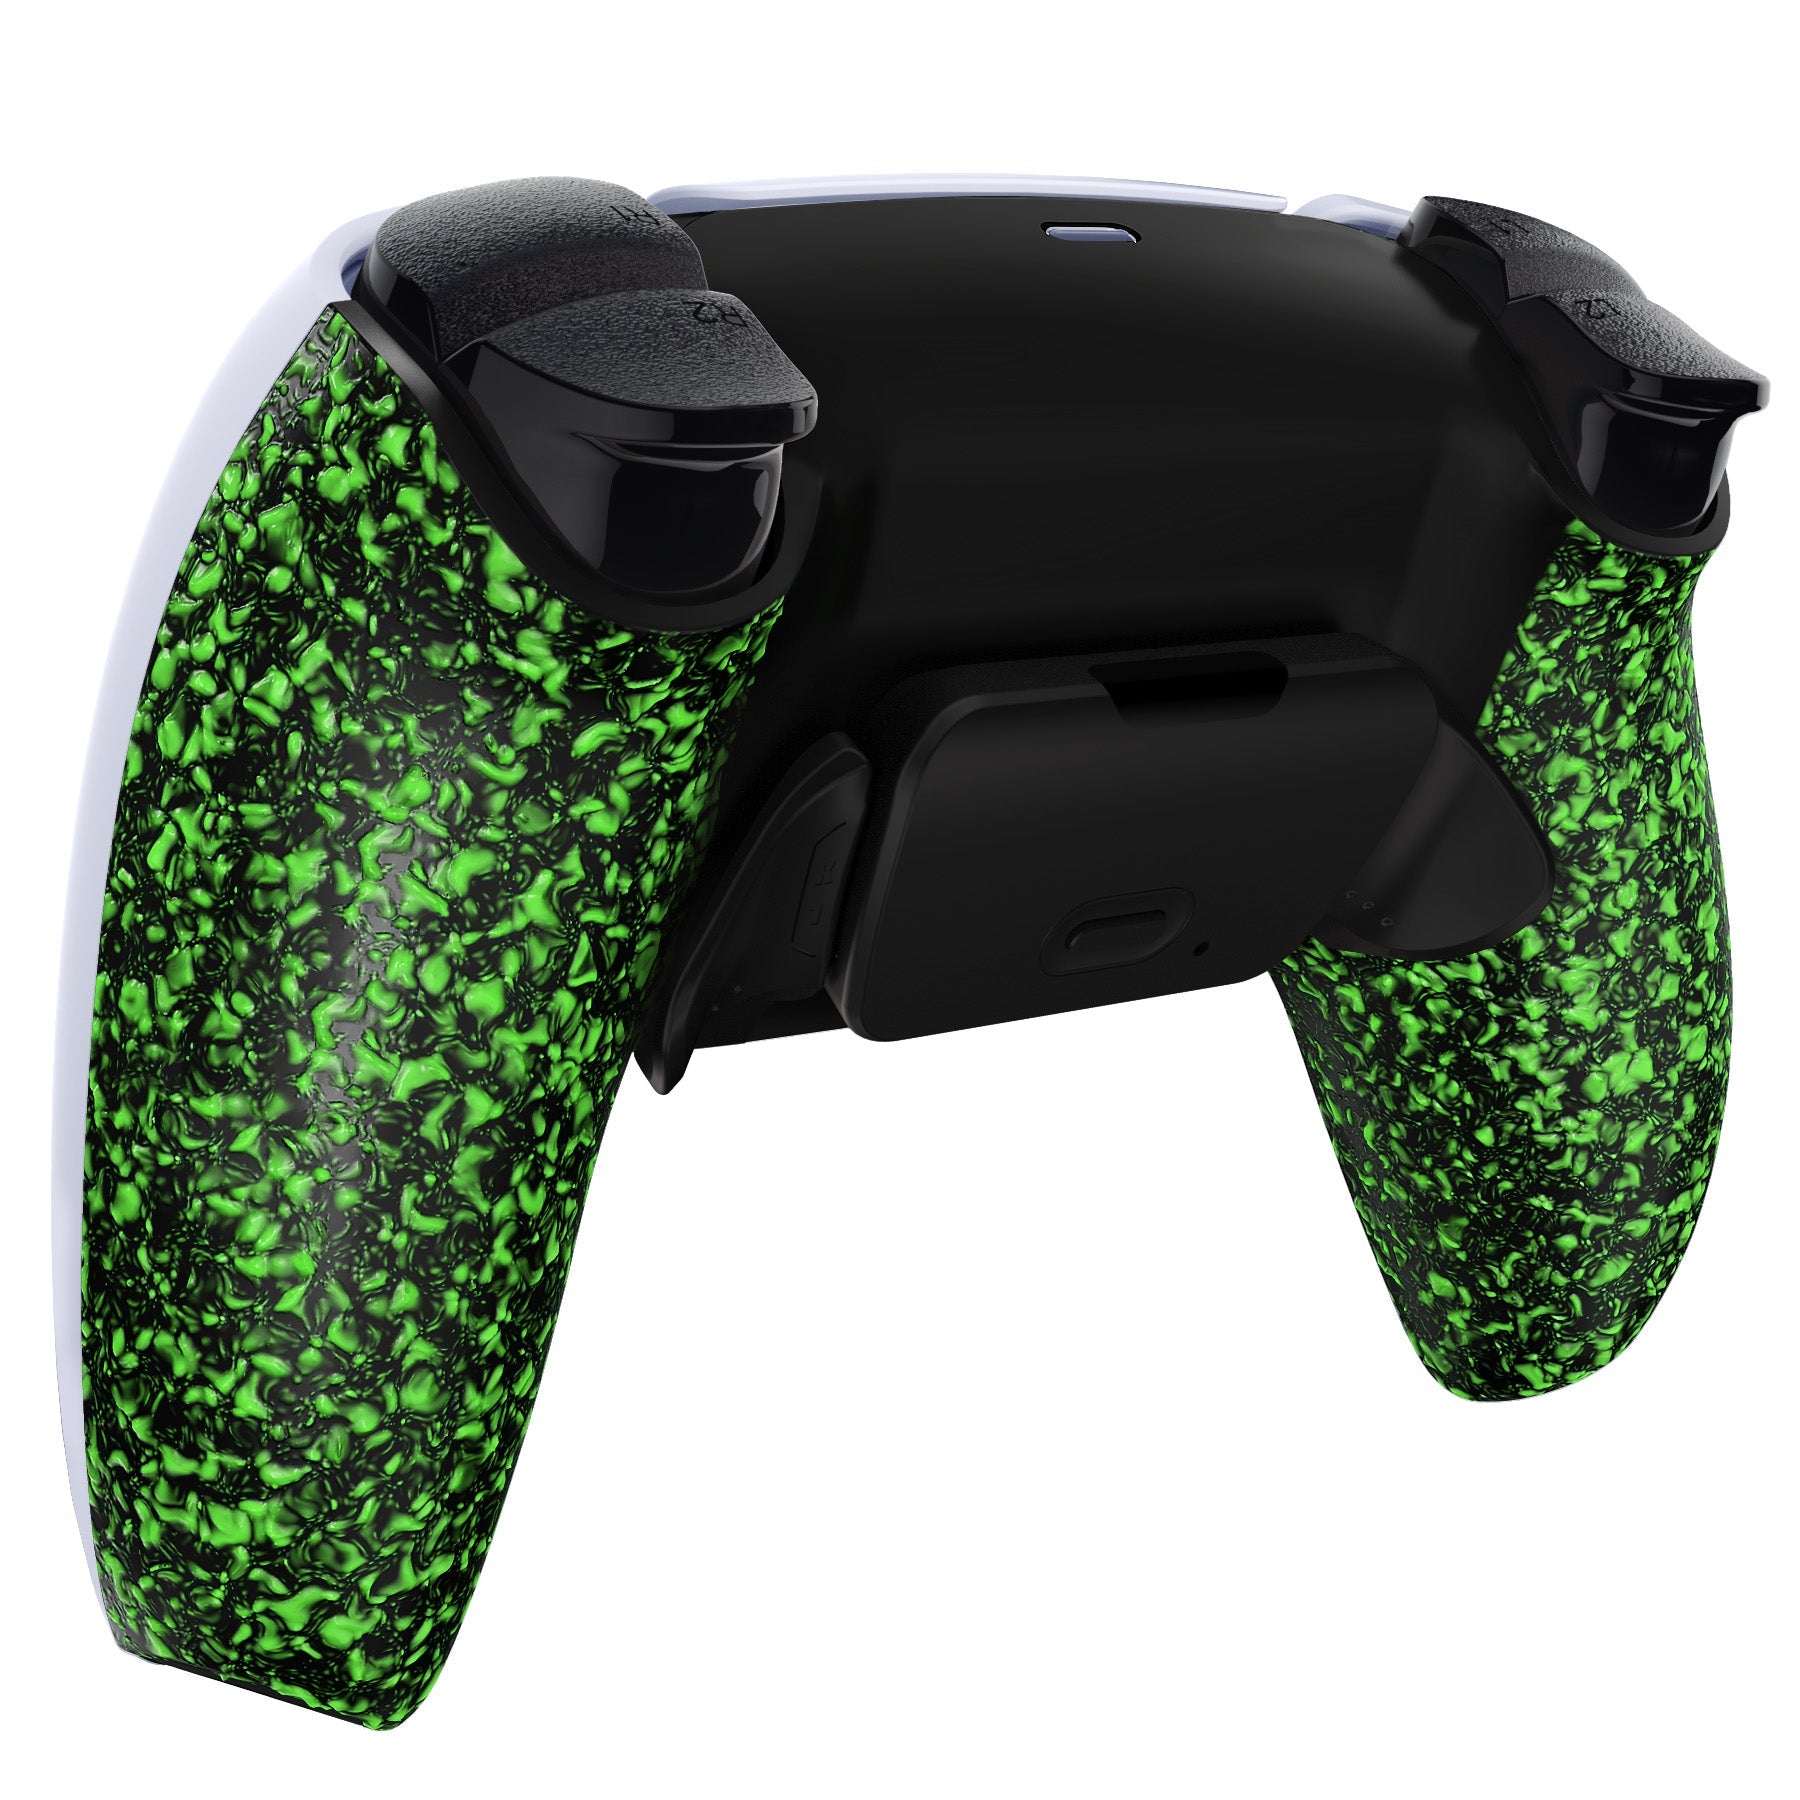 eXtremeRate Retail Textured Green Back Paddles Remappable Rise Remap Kit with Upgrade Board & Redesigned Back Shell & Back Buttons Attachment for ps5 Controller BDM-010 & BDM-020 - XPFP3044G2